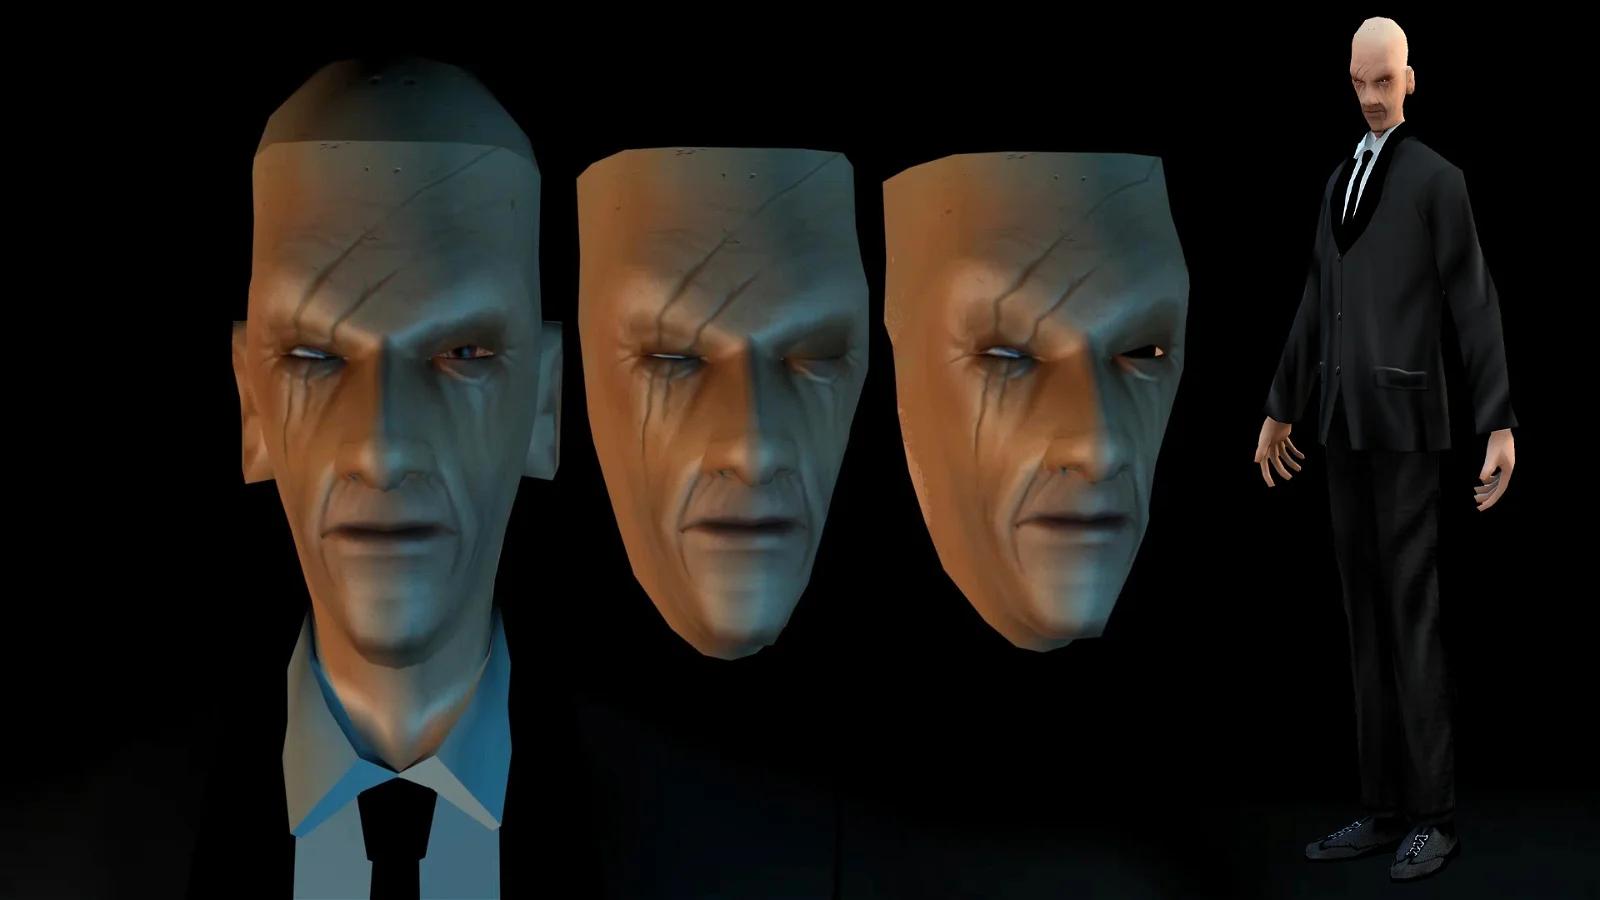 A video game character model sheet with different facial expressions and a full-body view of a male character, typically used in the game development process.
